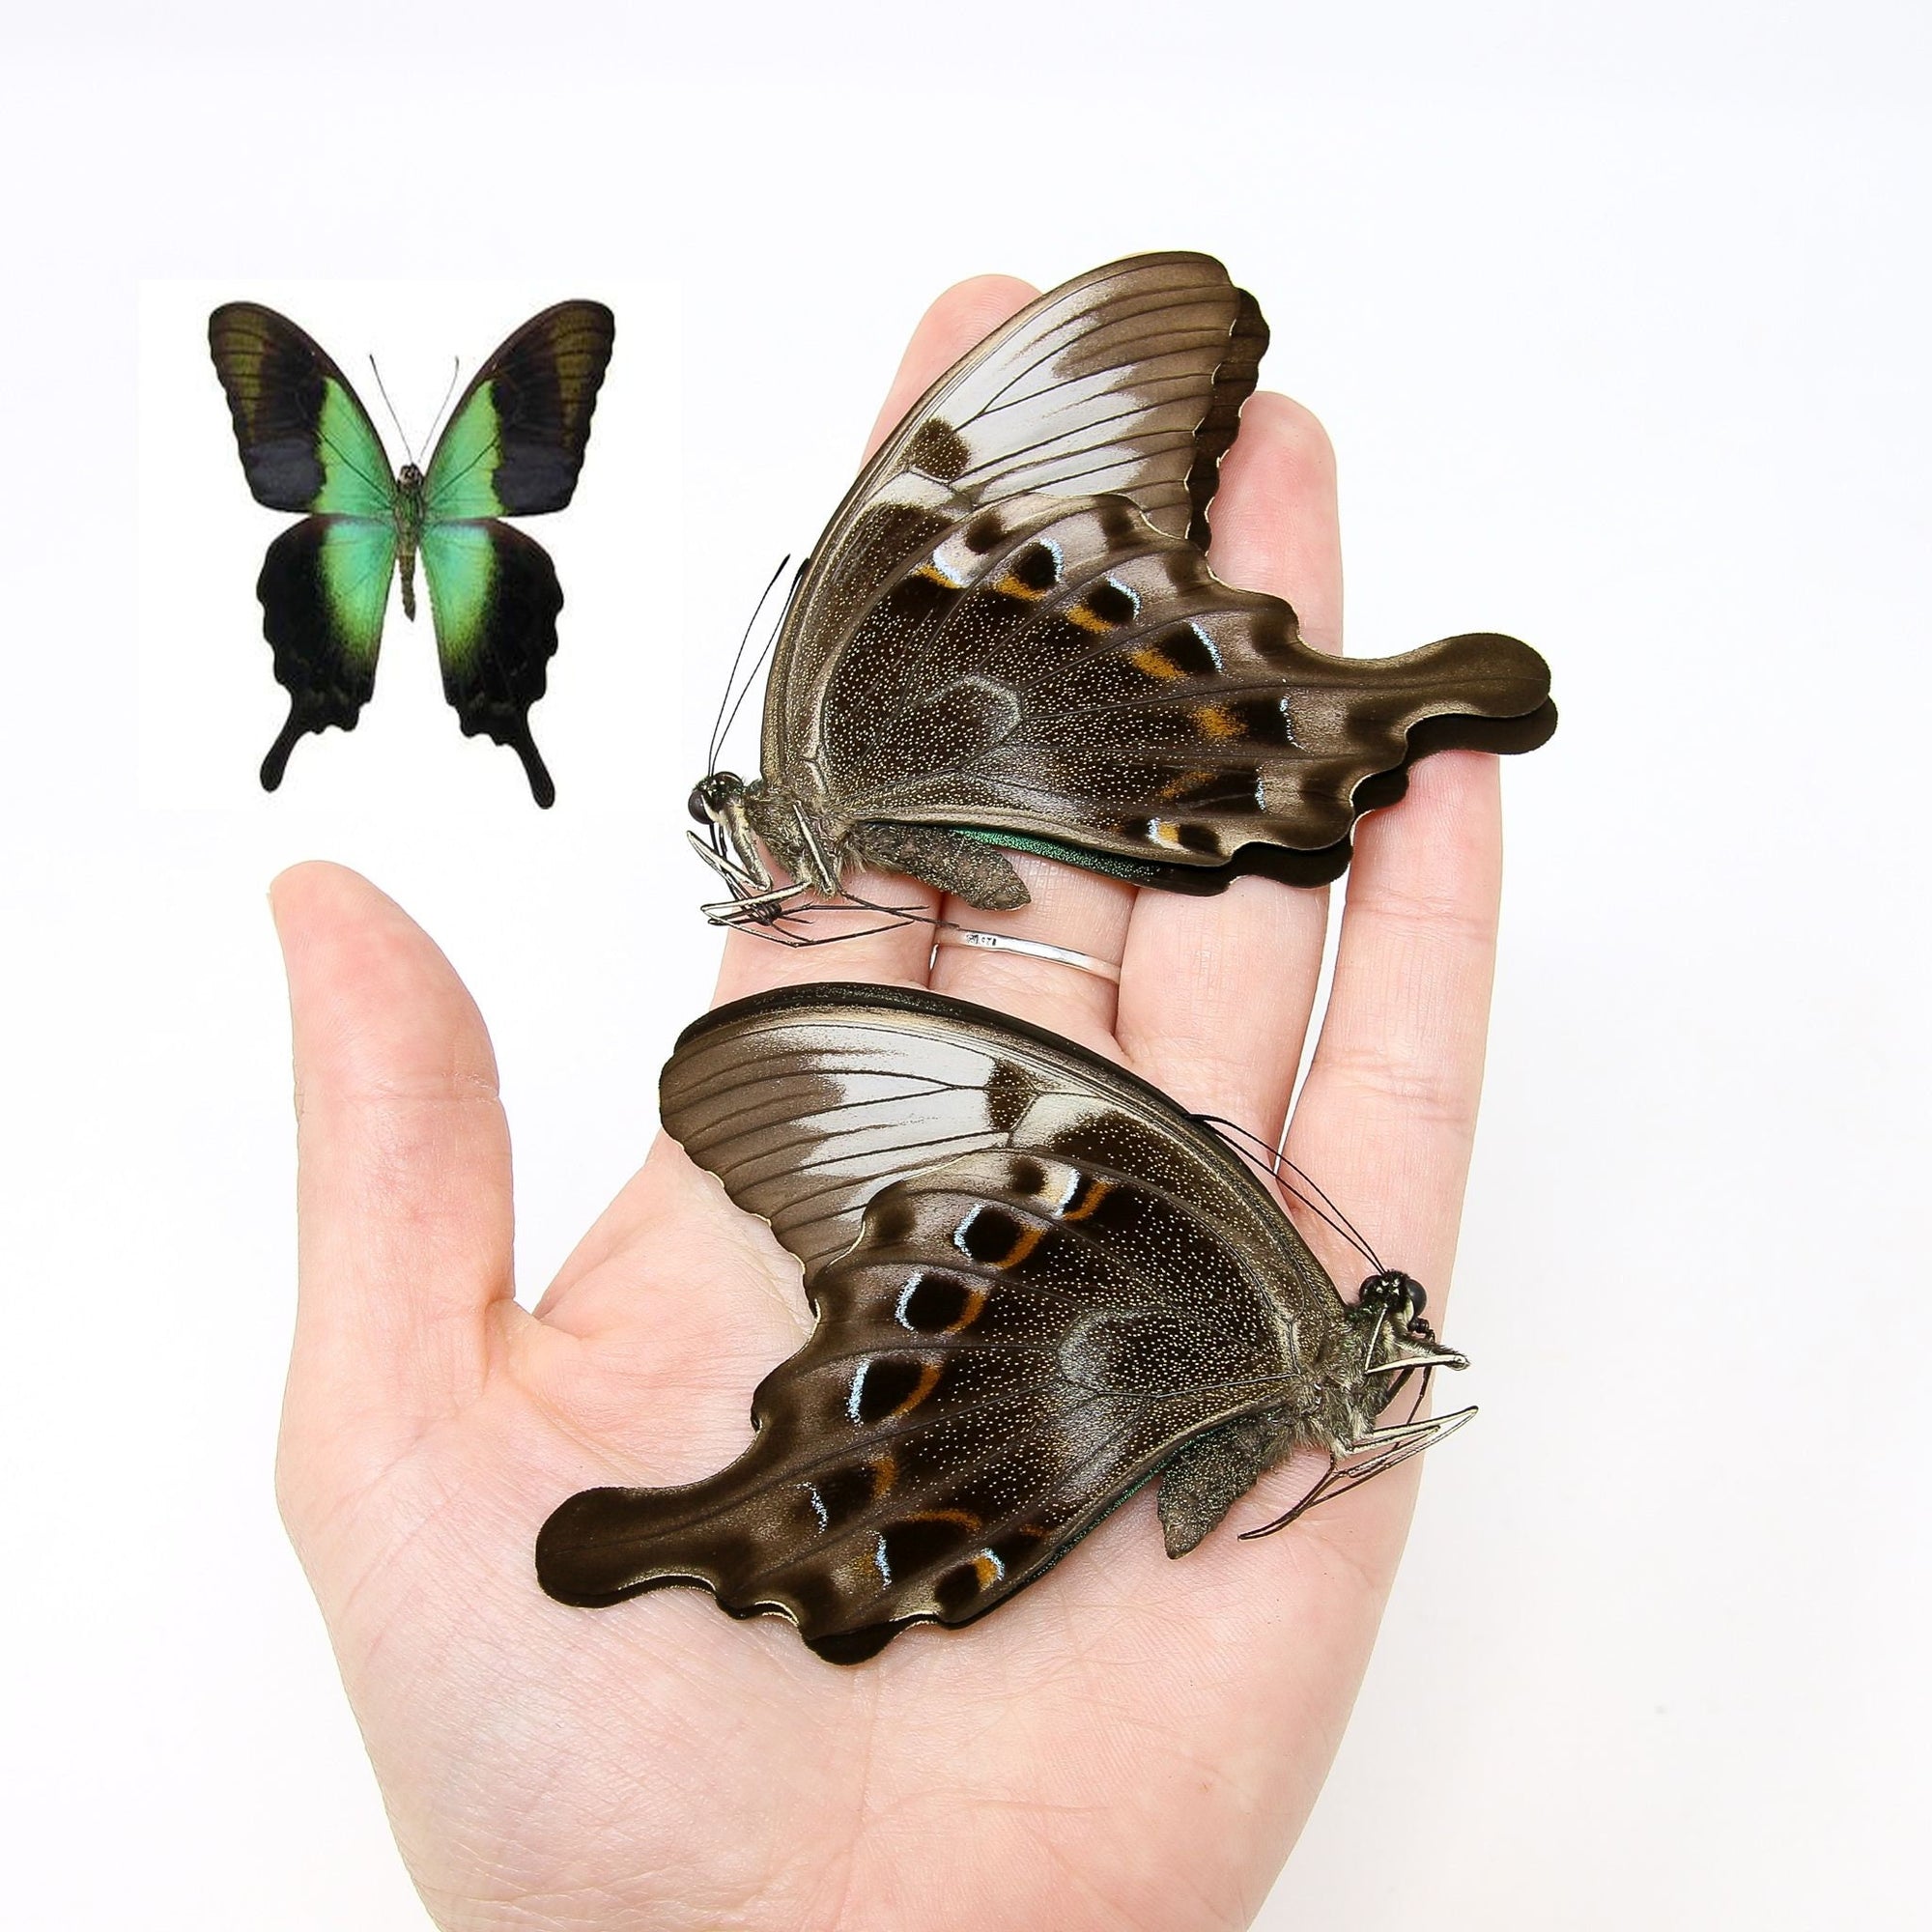 Two (2) Papilio peranthus adamantius, "Green Blue Swallowtail" A1 Real Dry-Preserved Butterflies, Unmounted Entomology Taxidermy Specimens